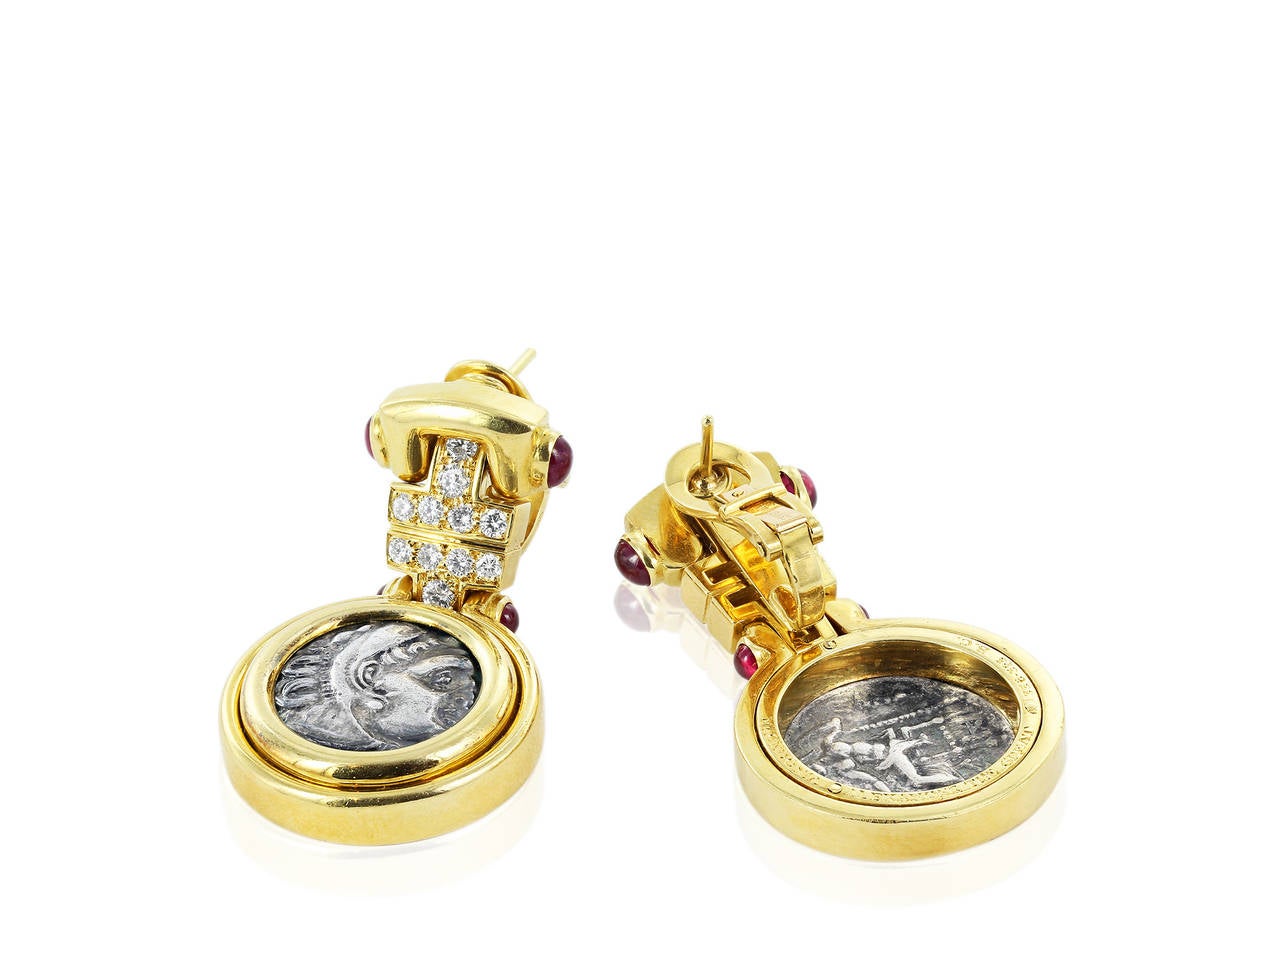 18 karat yellow gold ancient coin drop earrings set with full cut diamond and cab ruby accents, signed Bulgari